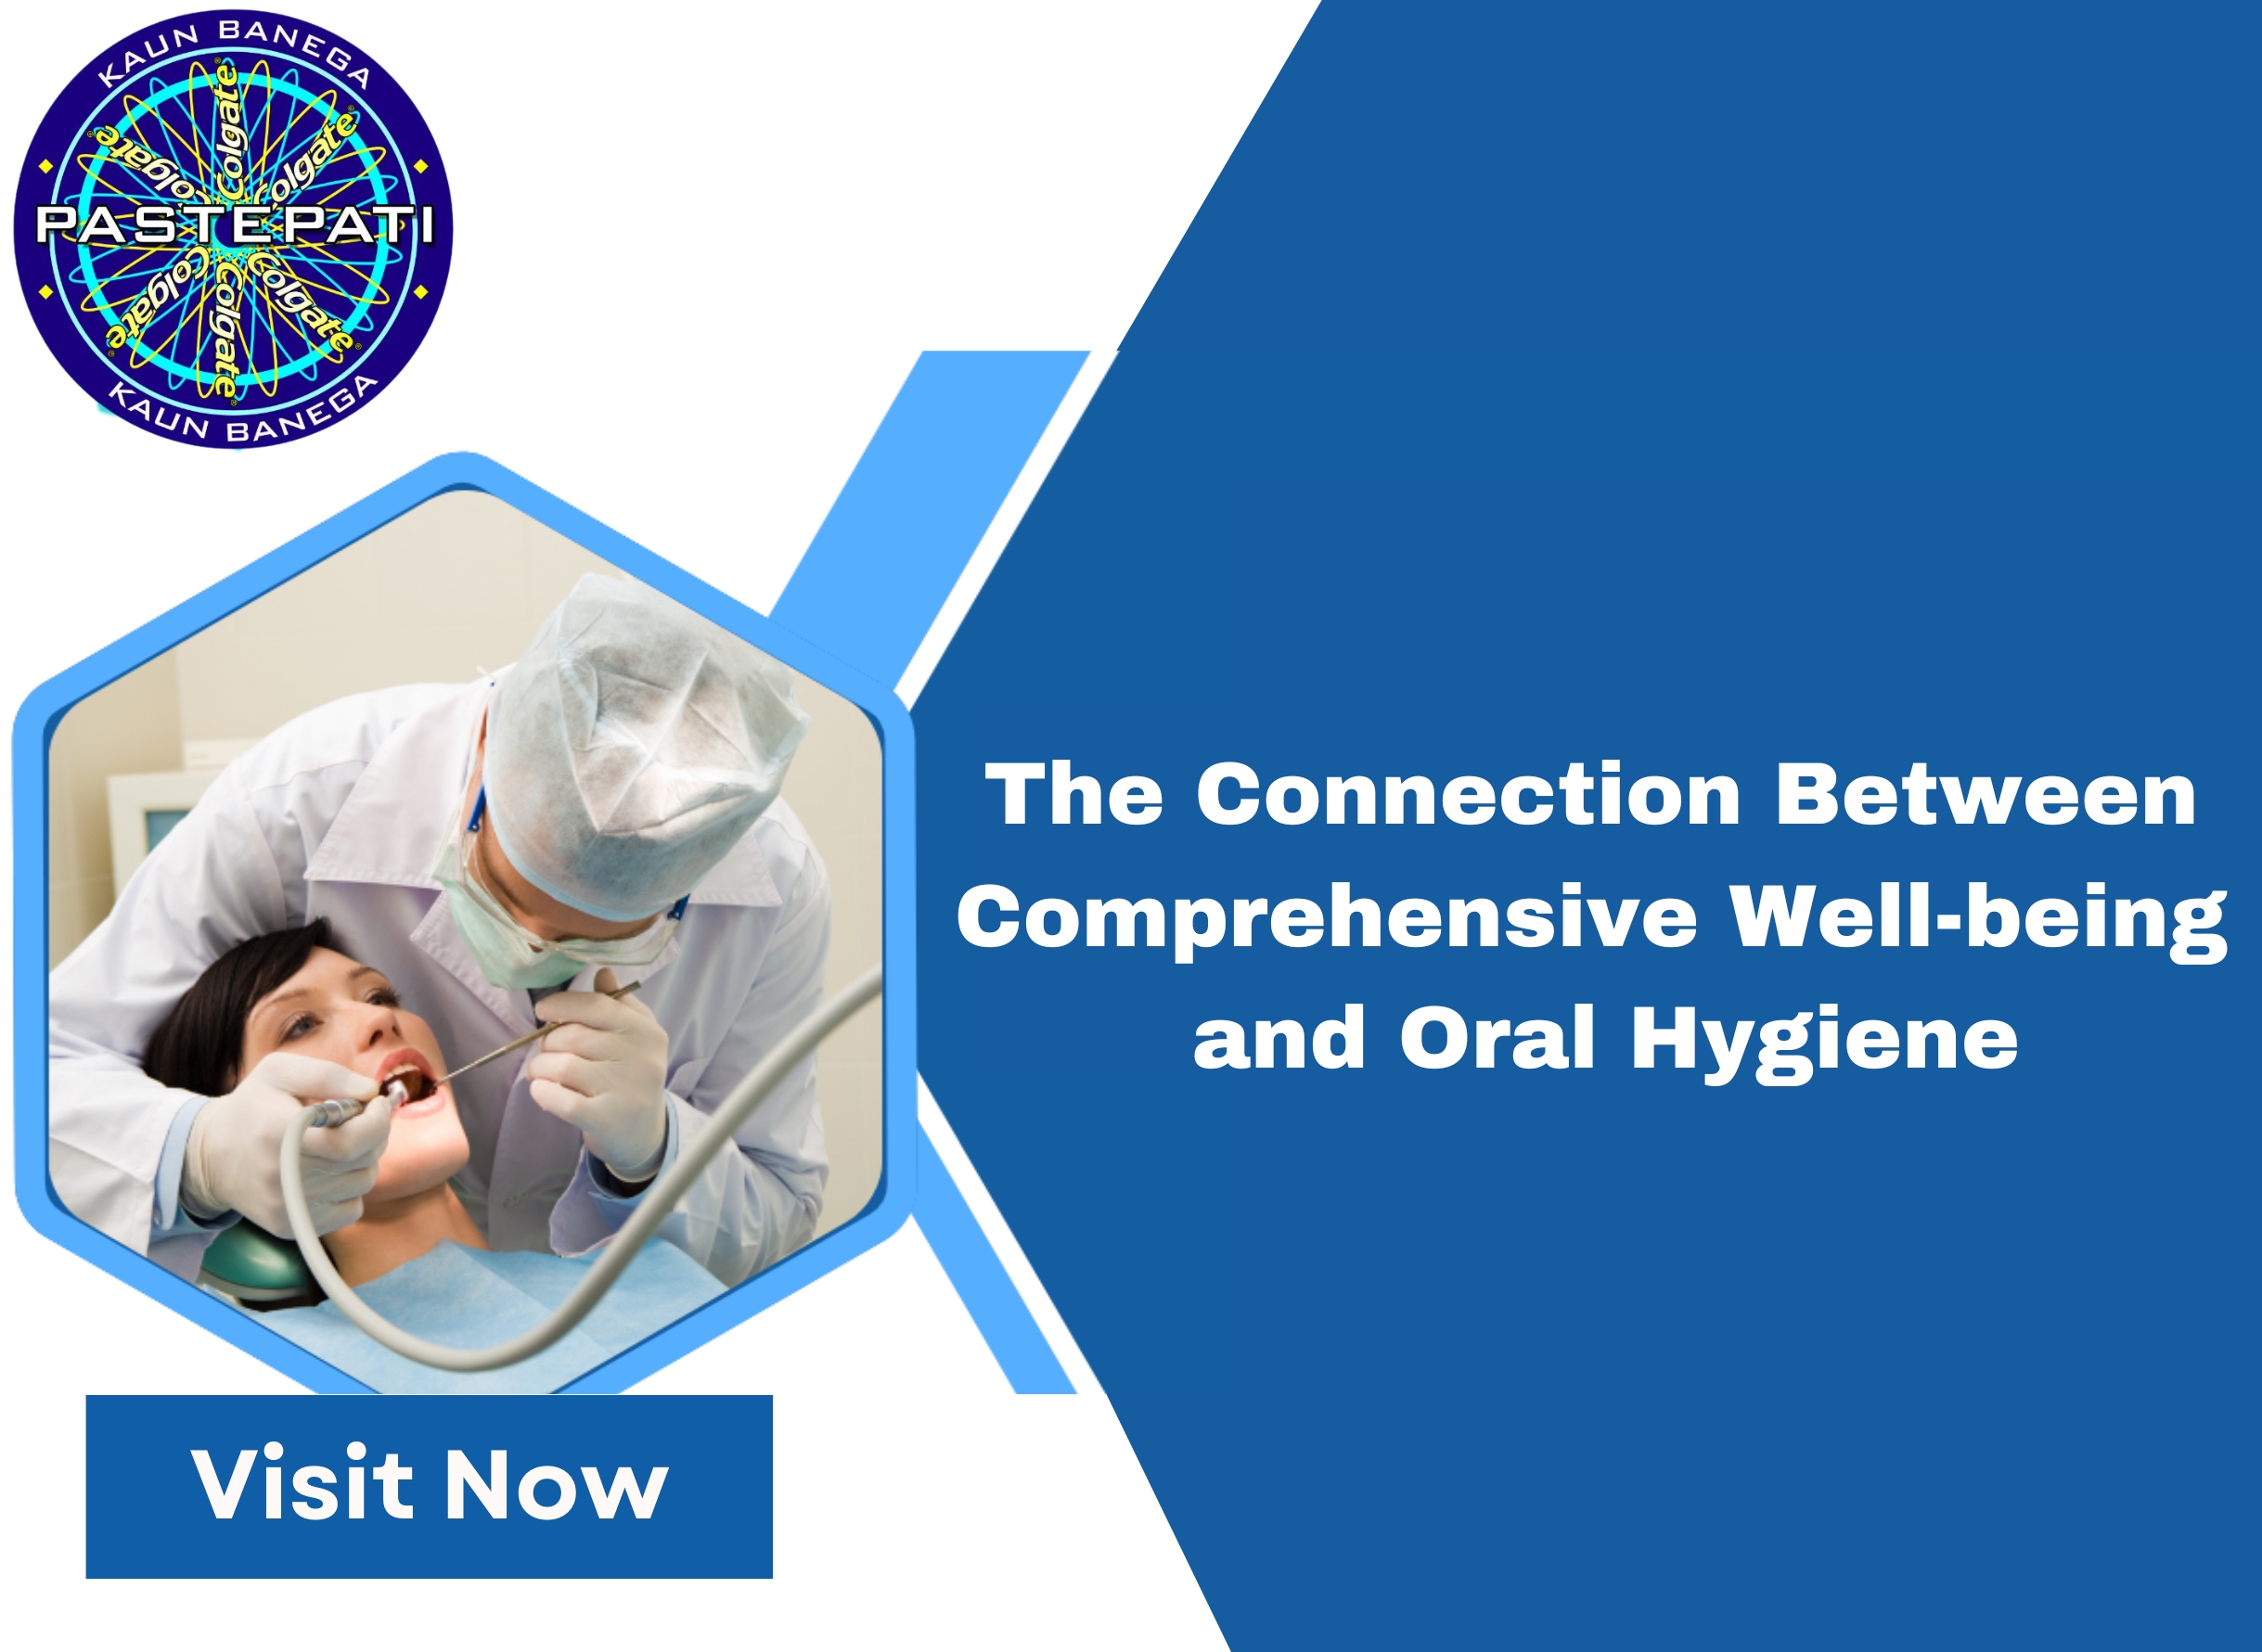 The Connection Between Comprehensive Well-being and Oral Hygiene